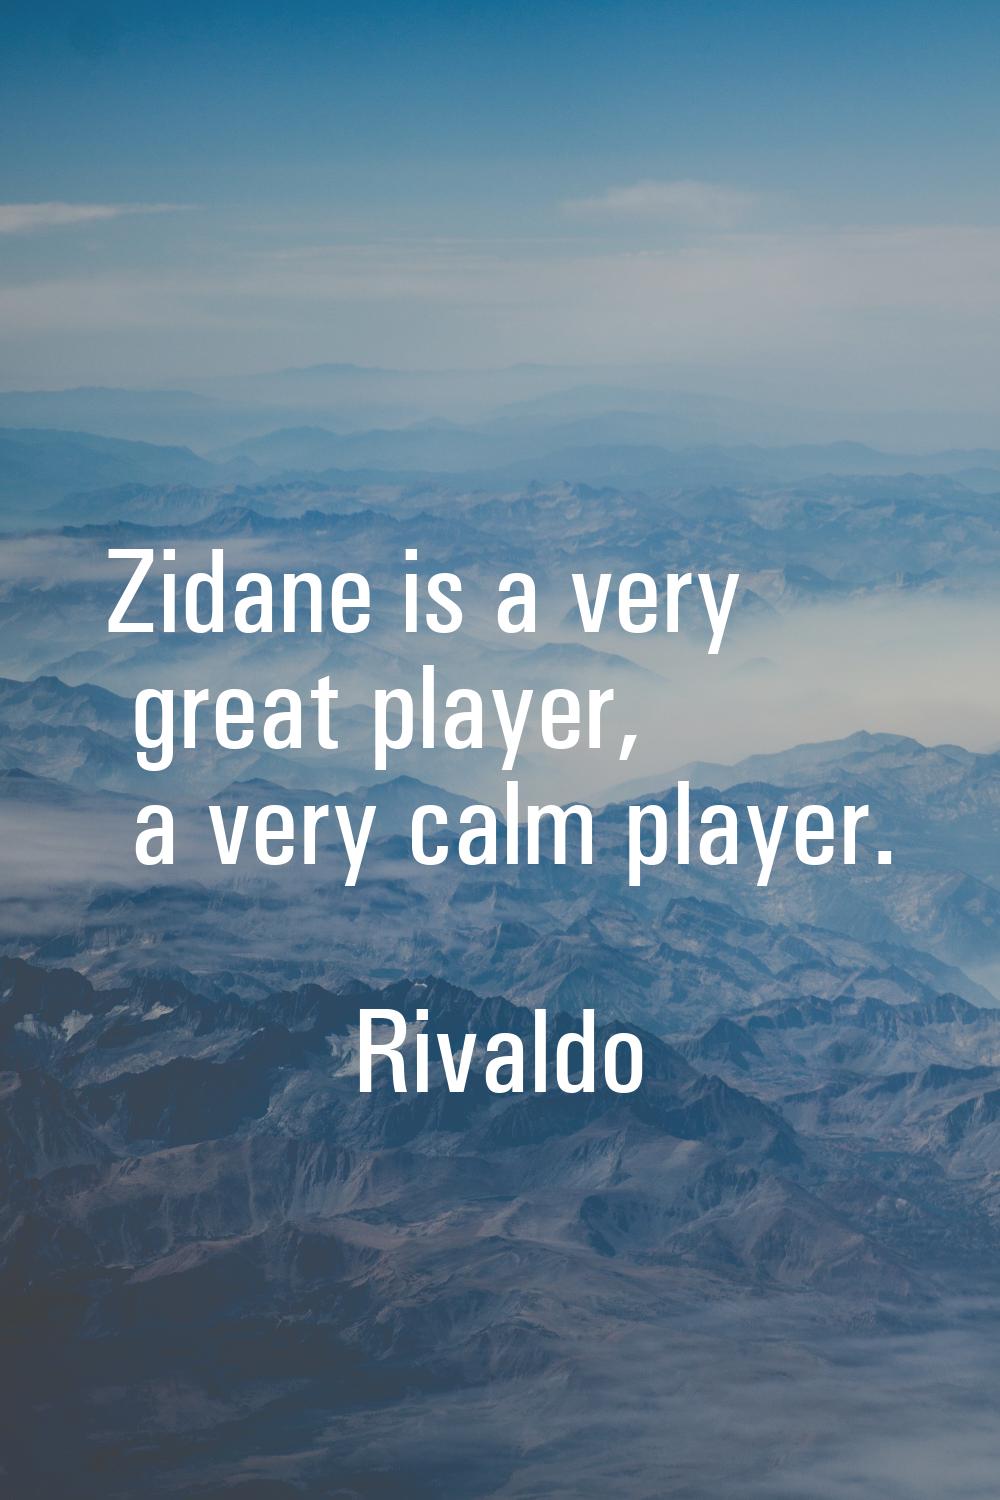 Zidane is a very great player, a very calm player.